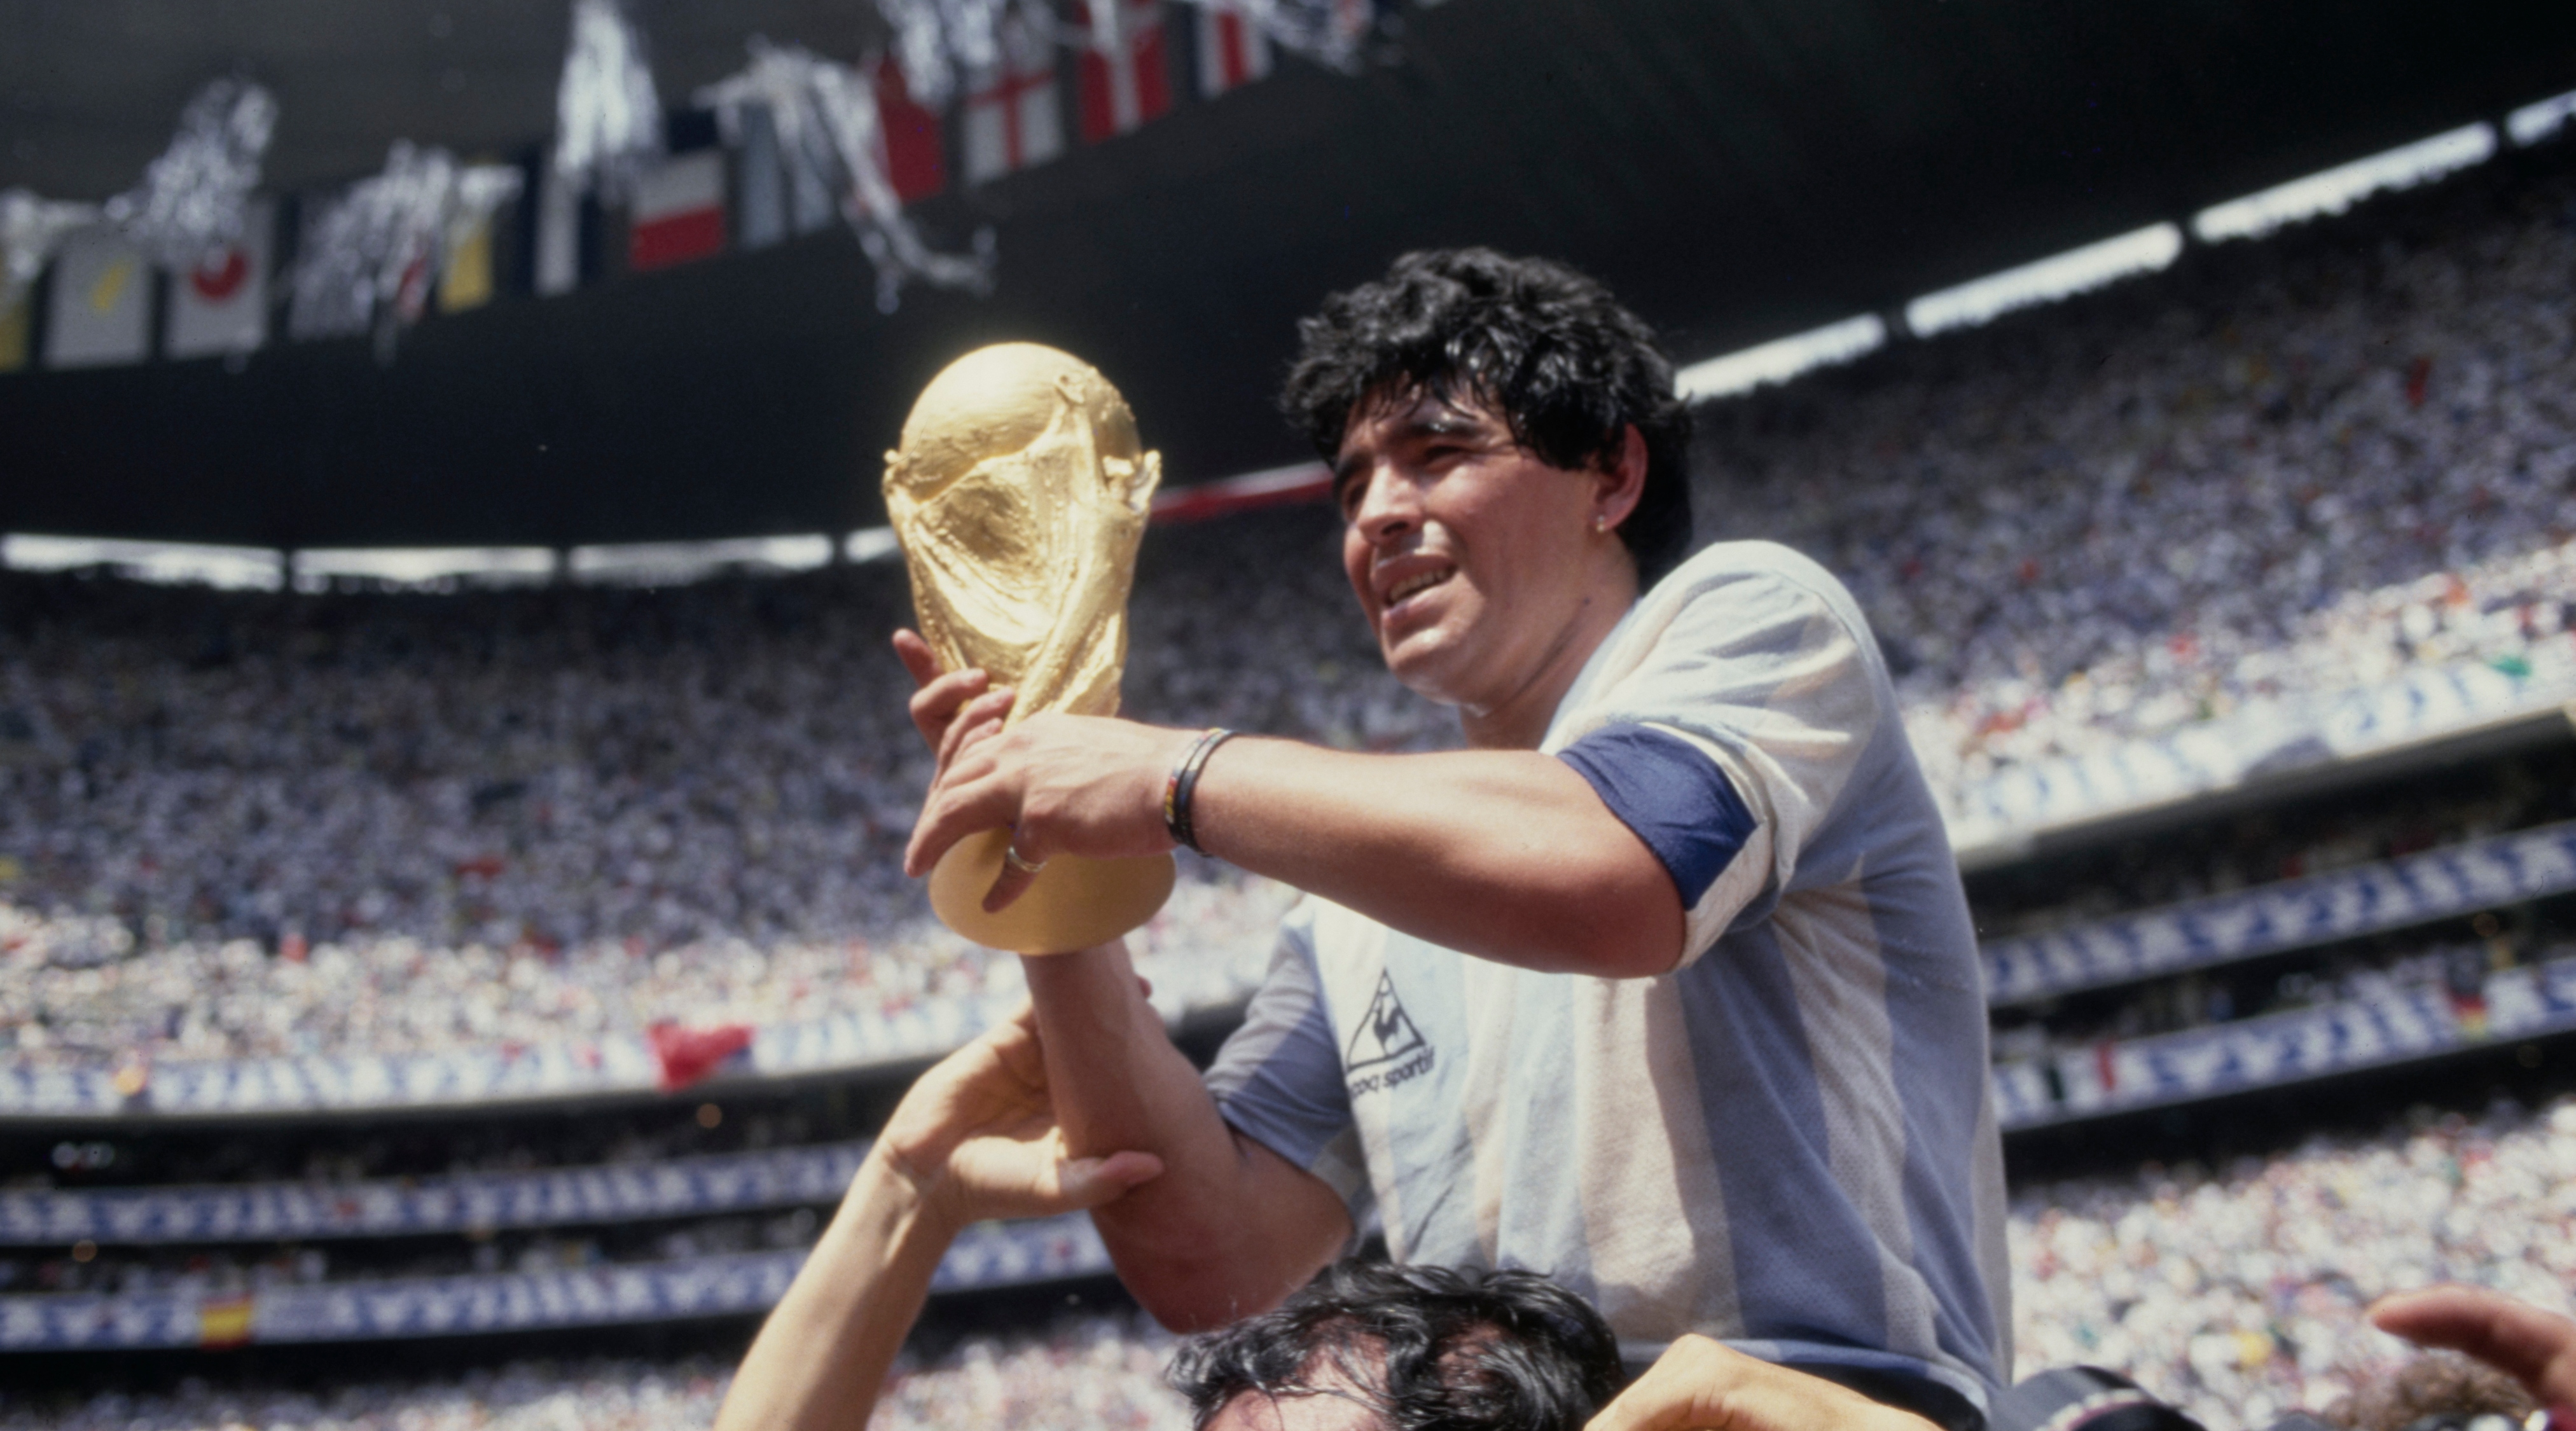 Diego Maradona holds the World Cup trophy after Argentina defeated West Germany 3-2 in the 1986 World Cup Final at the Estadio Azteca, Mexico City on June 29, 1986.